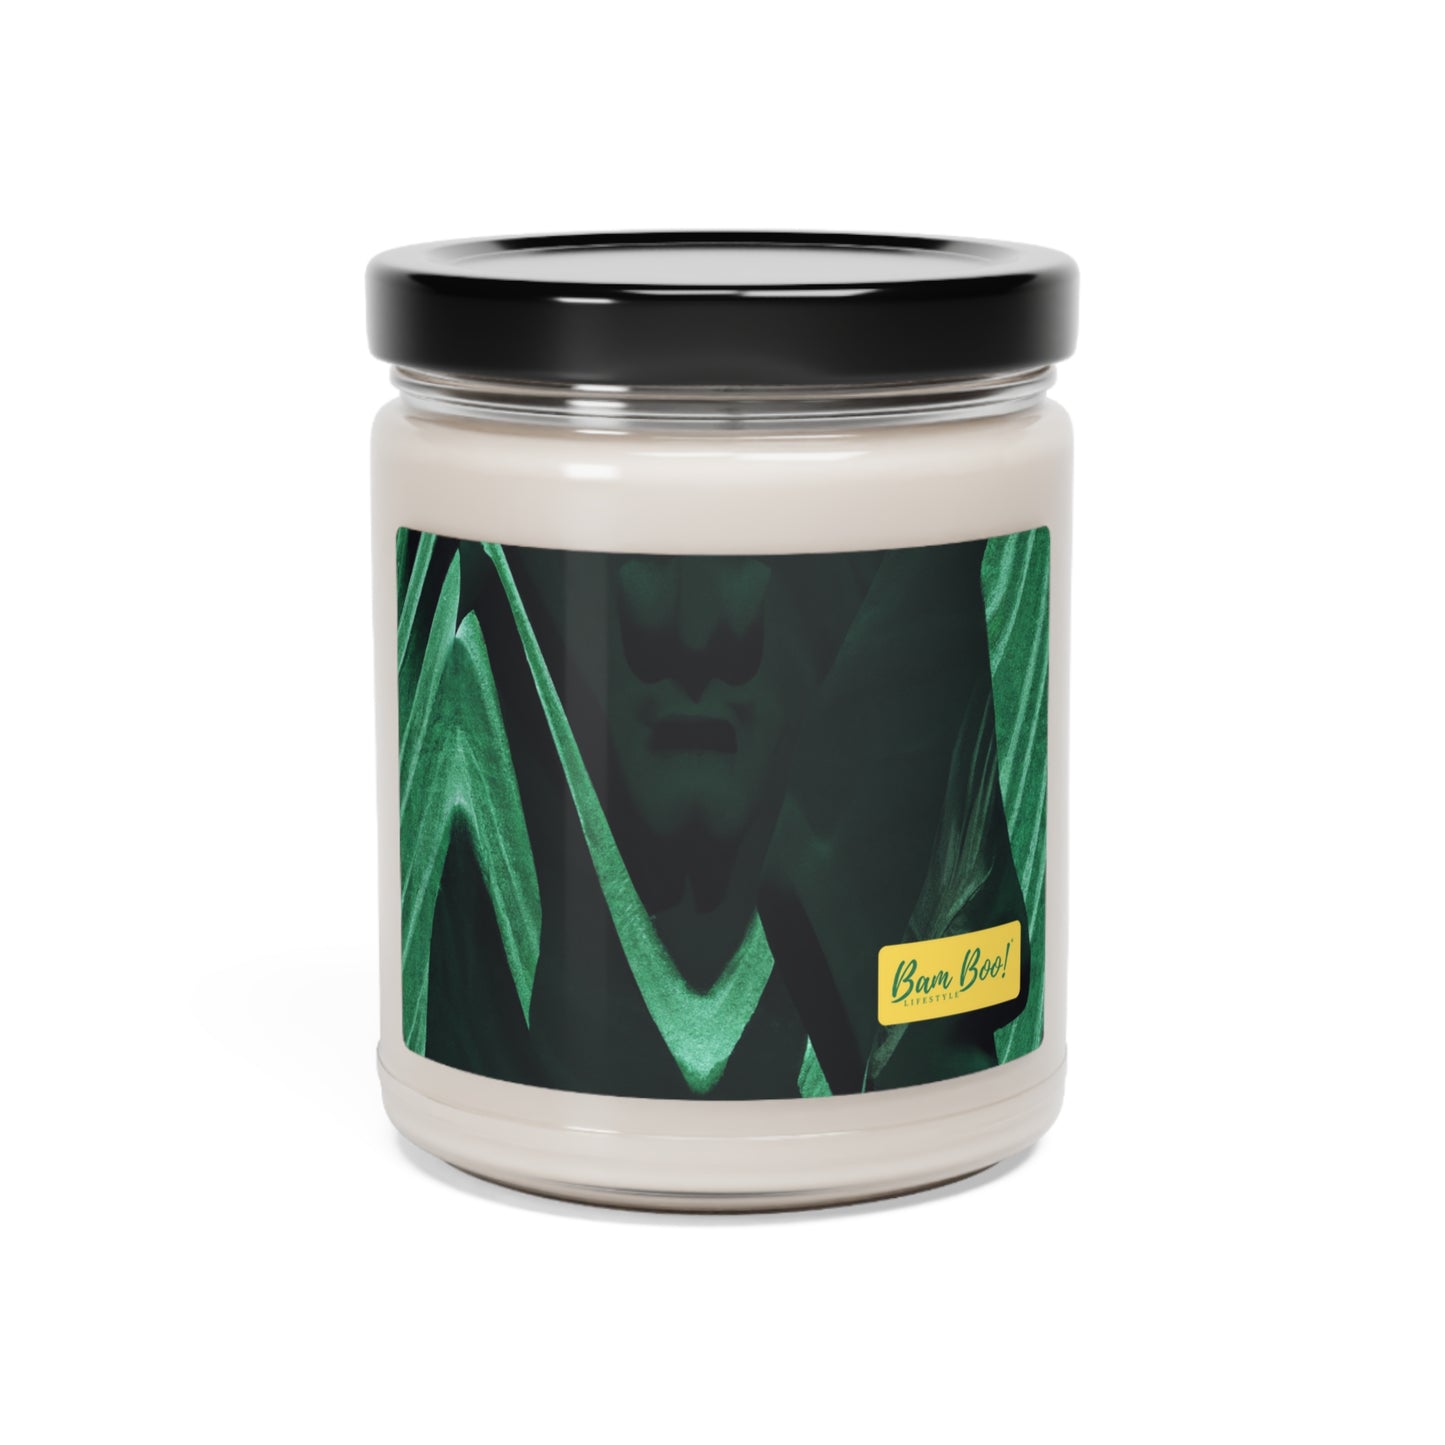 "The Splendor of Nature: An Artistic Fusion of Color, Shape, and Texture" - Bam Boo! Lifestyle Eco-friendly Soy Candle